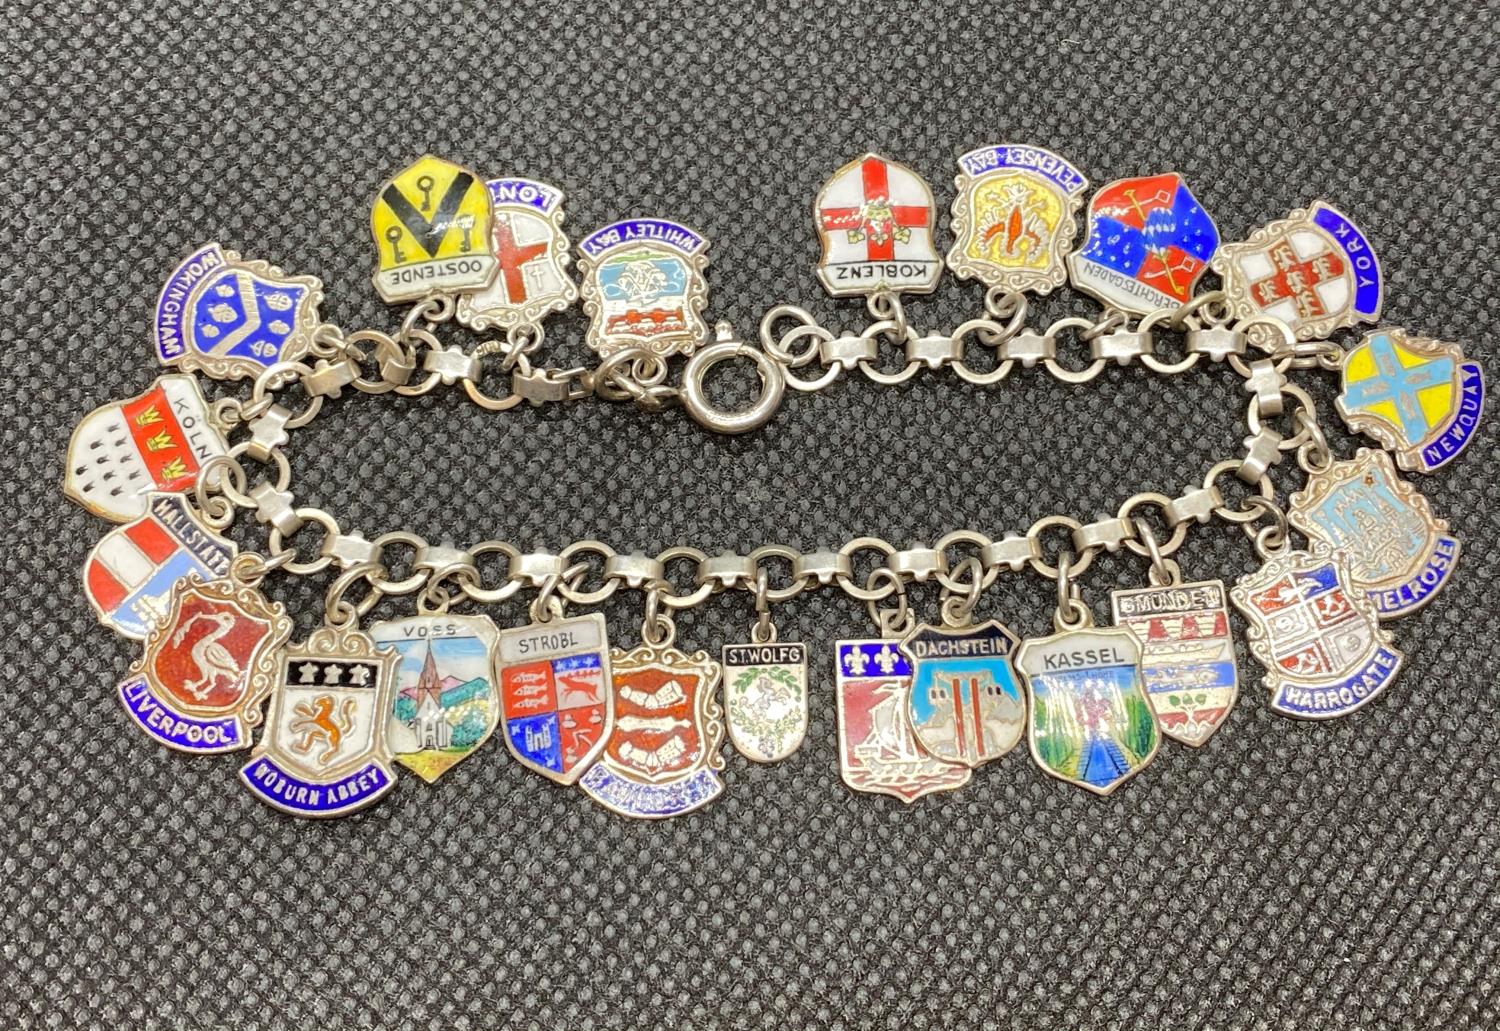 Foreign silver (800 grade) bracelet with 23 charms and enamel souvenir charms 30g